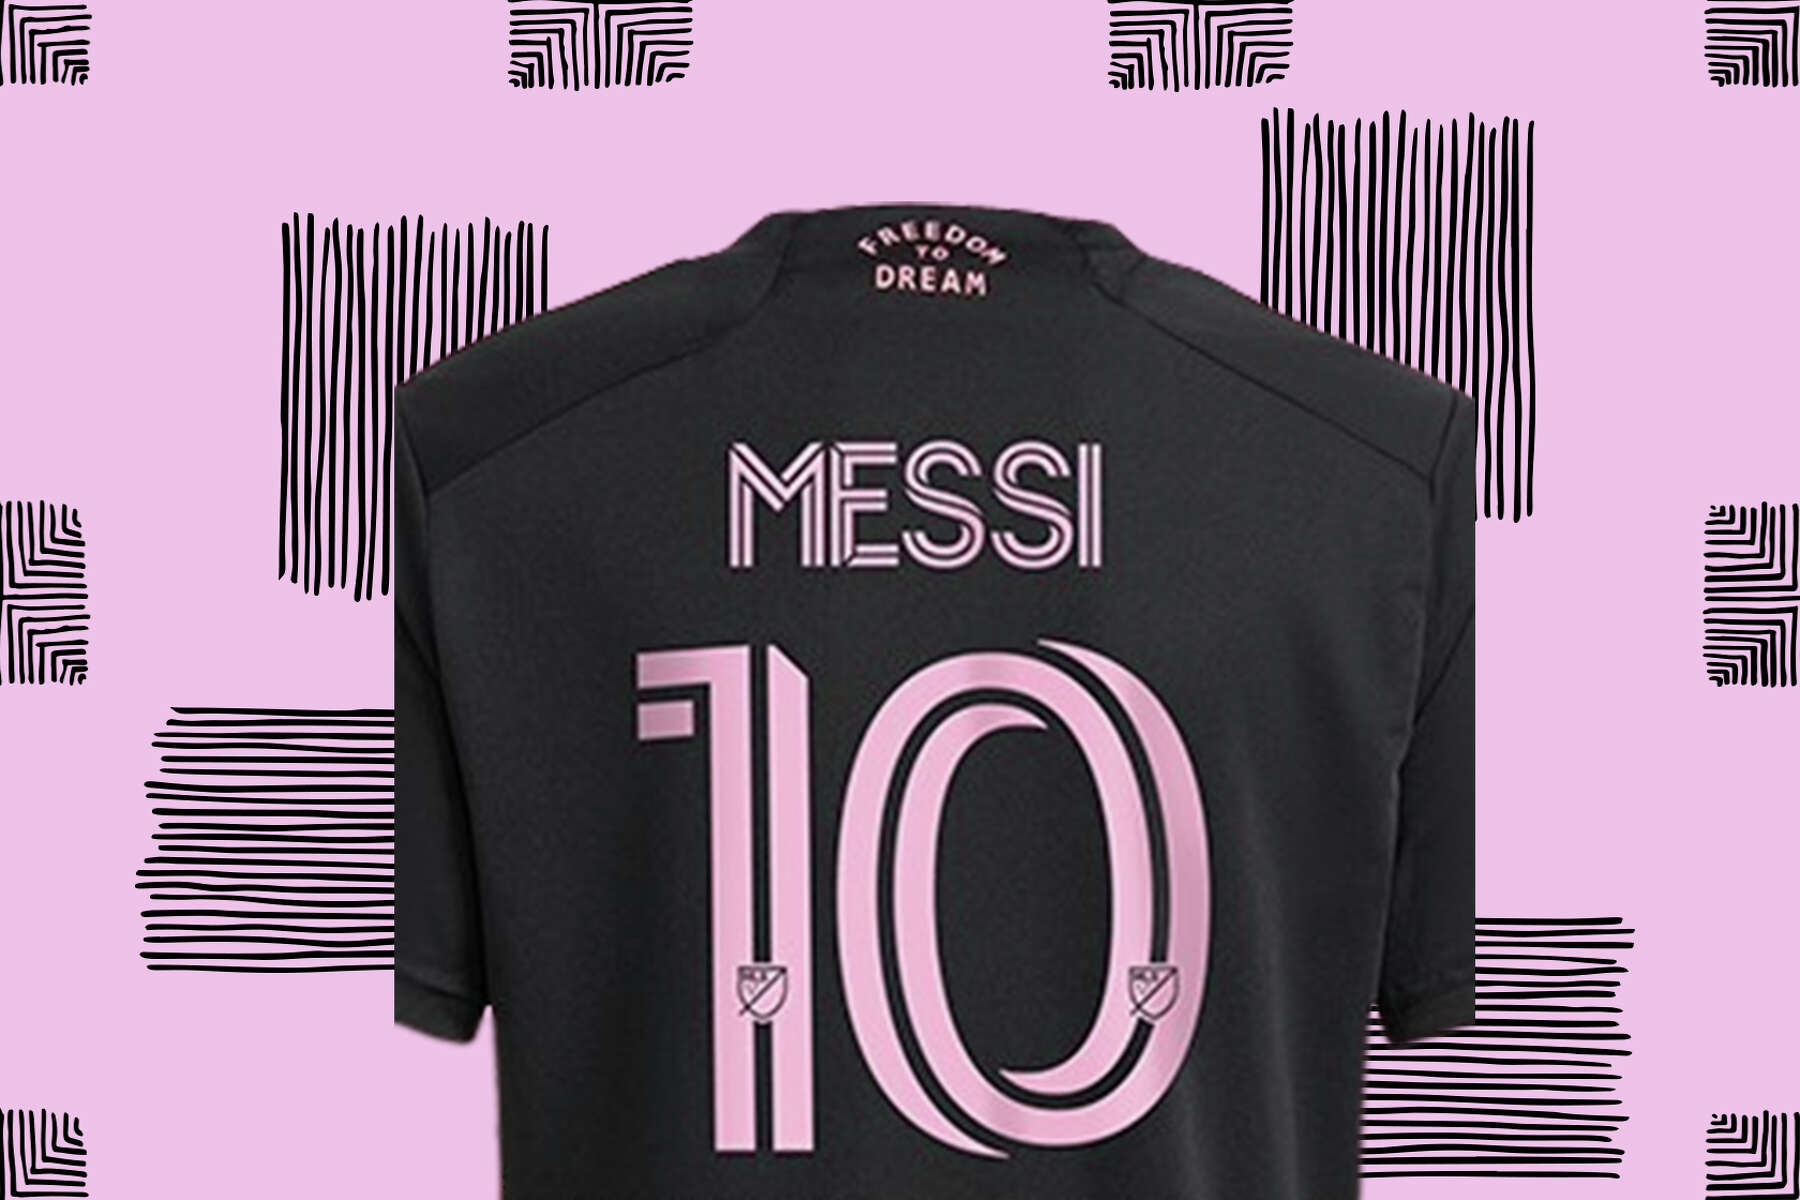 Messi Miami jersey: You can finally buy one starting now